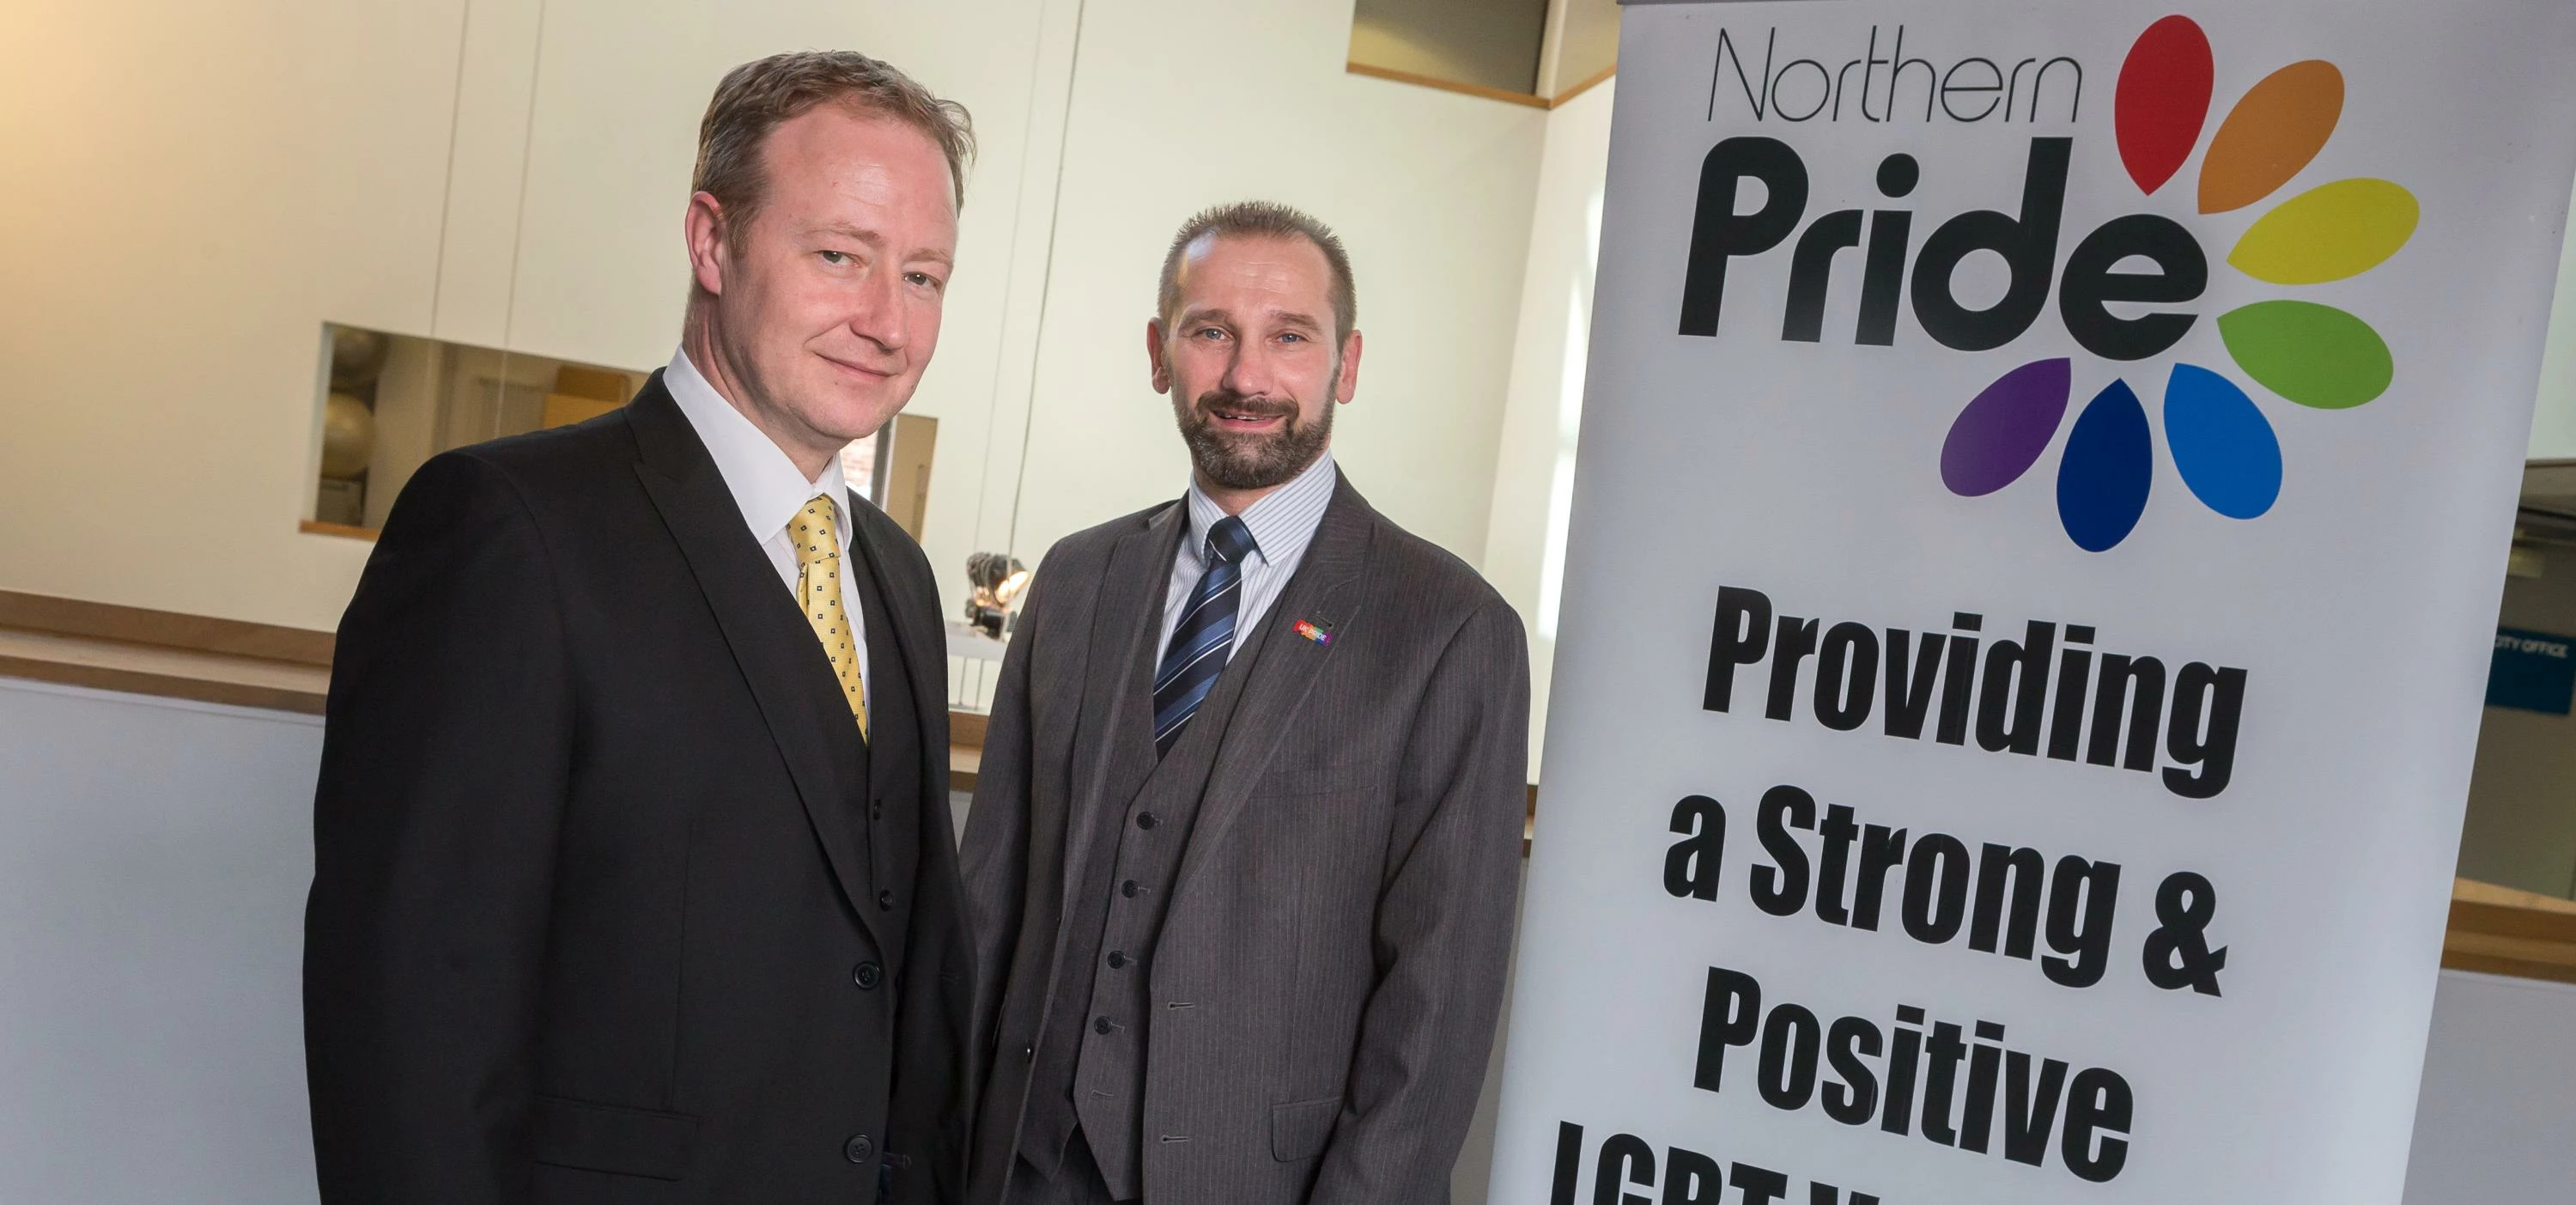 Left, David Wood, event catering manager for Ramside Estates with chair of Northern Pride Mark Nicho